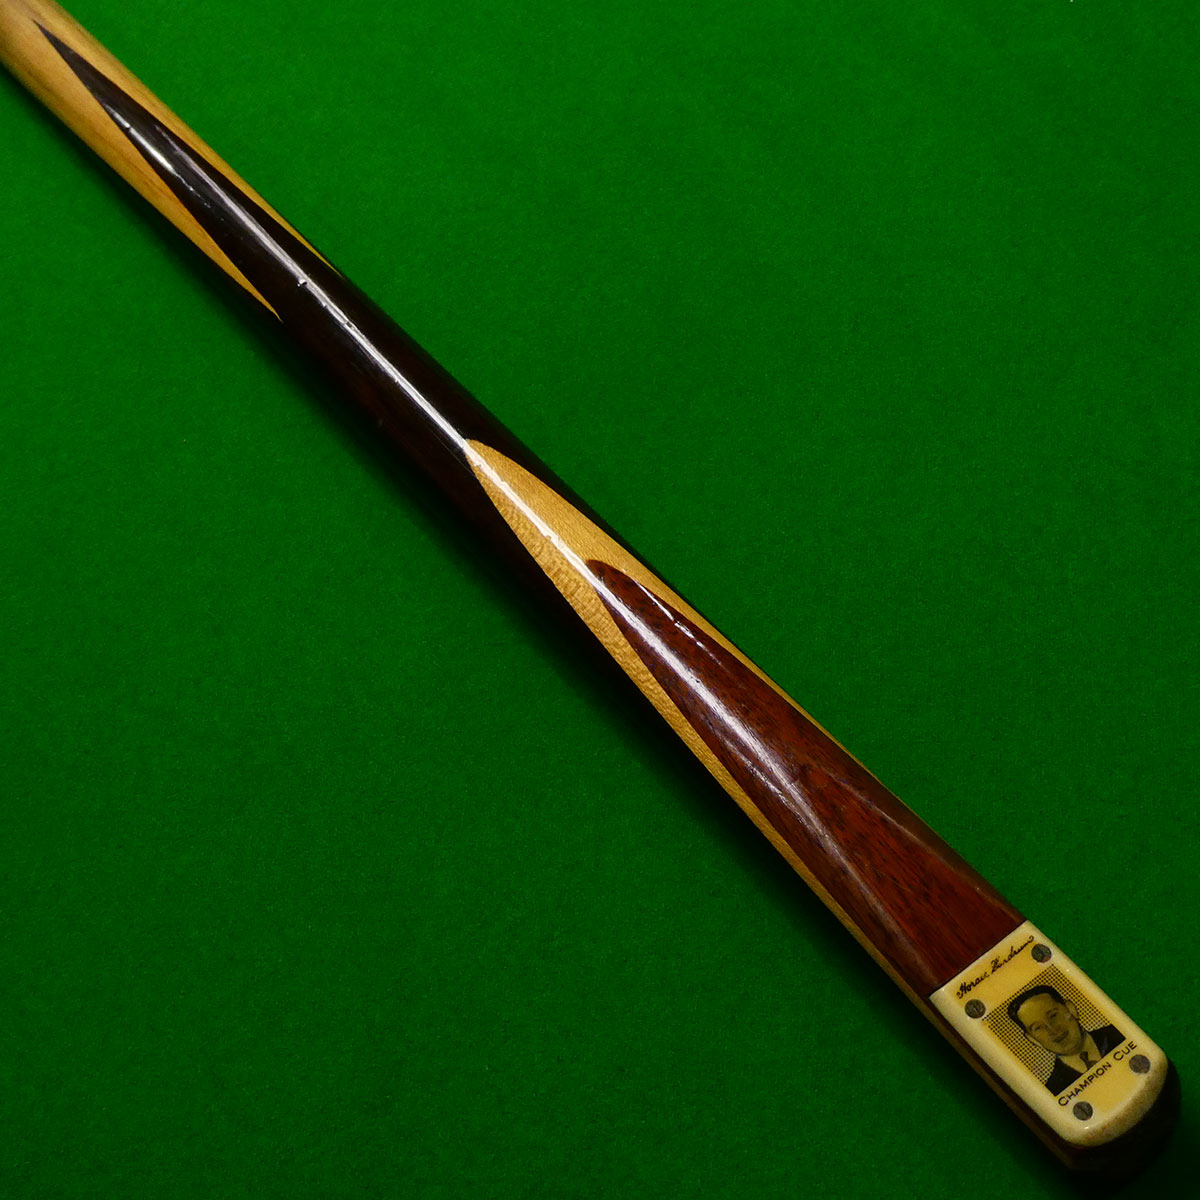 Horace Lindrum Champion Cue by Peradon